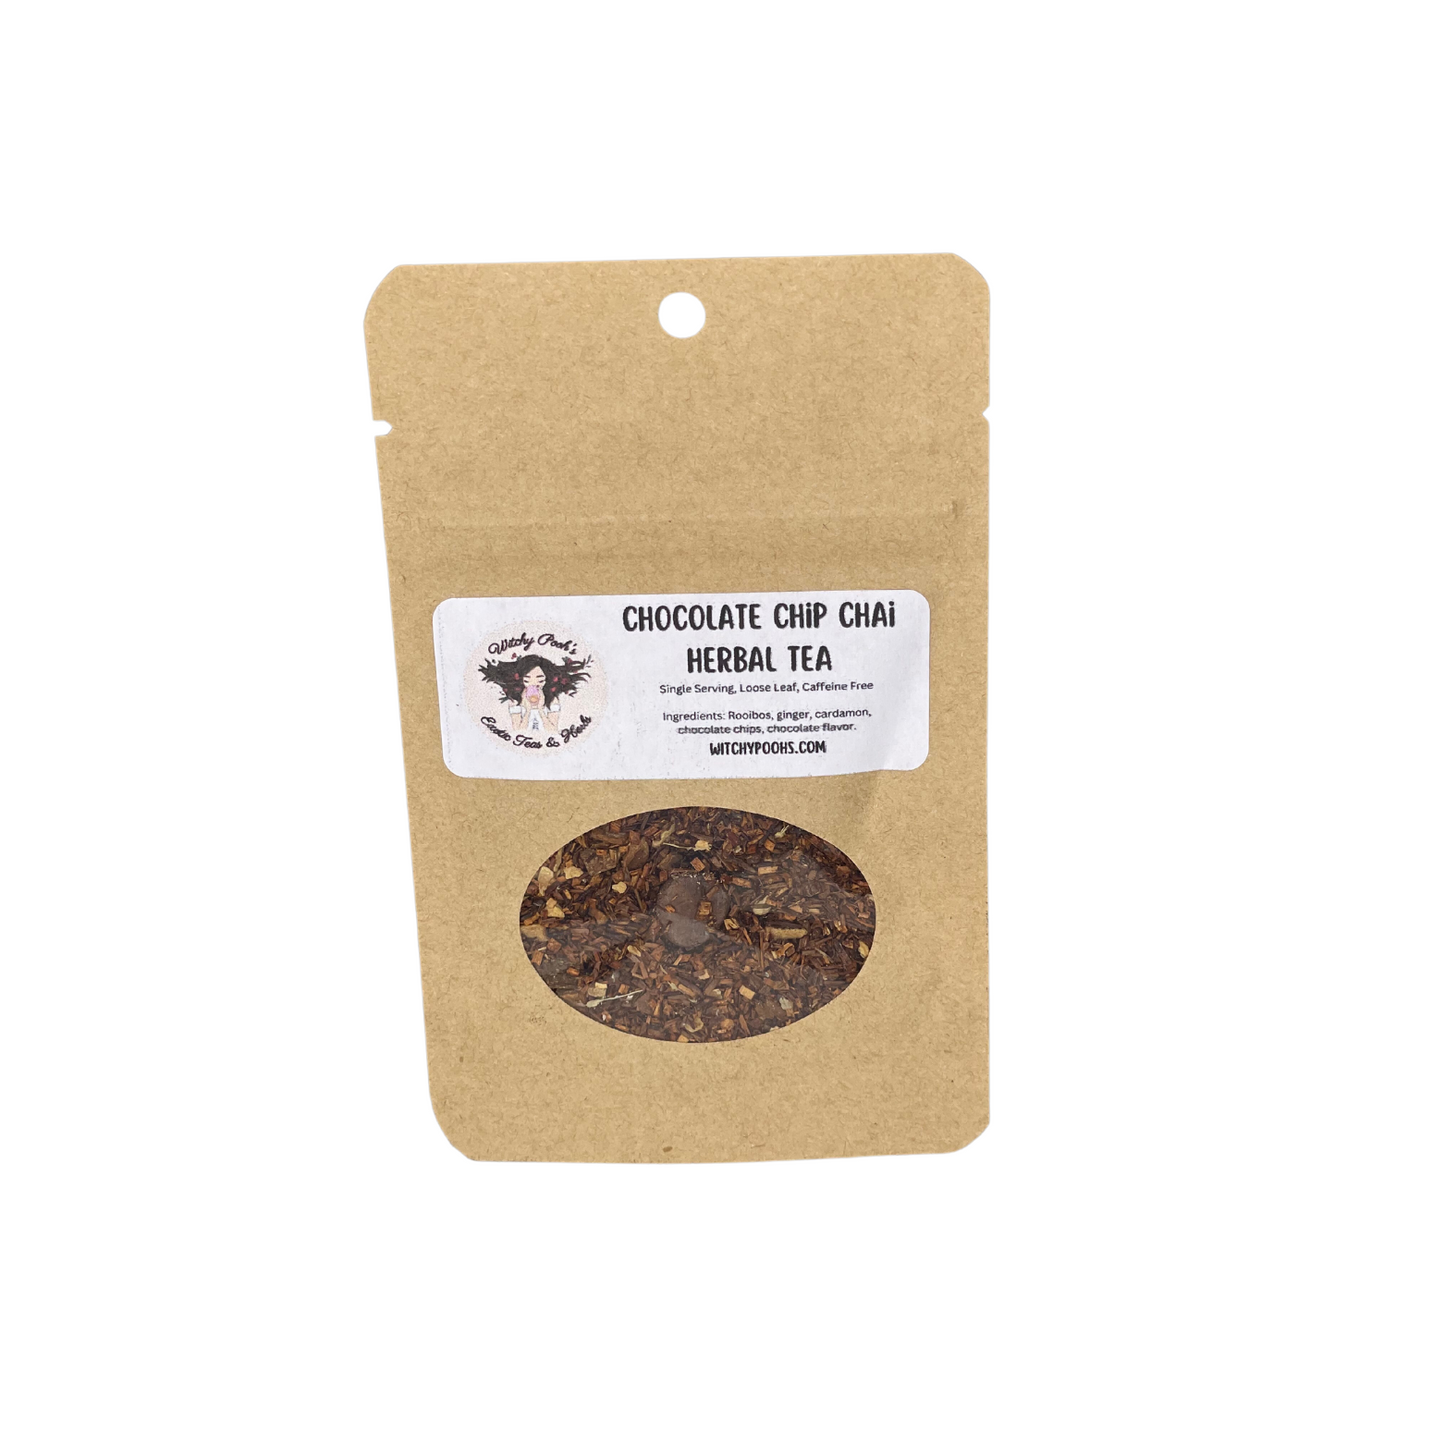 Chocolate Chip Chai Loose Leaf Rooibos Herbal Tea with Real Chocolate Chips!